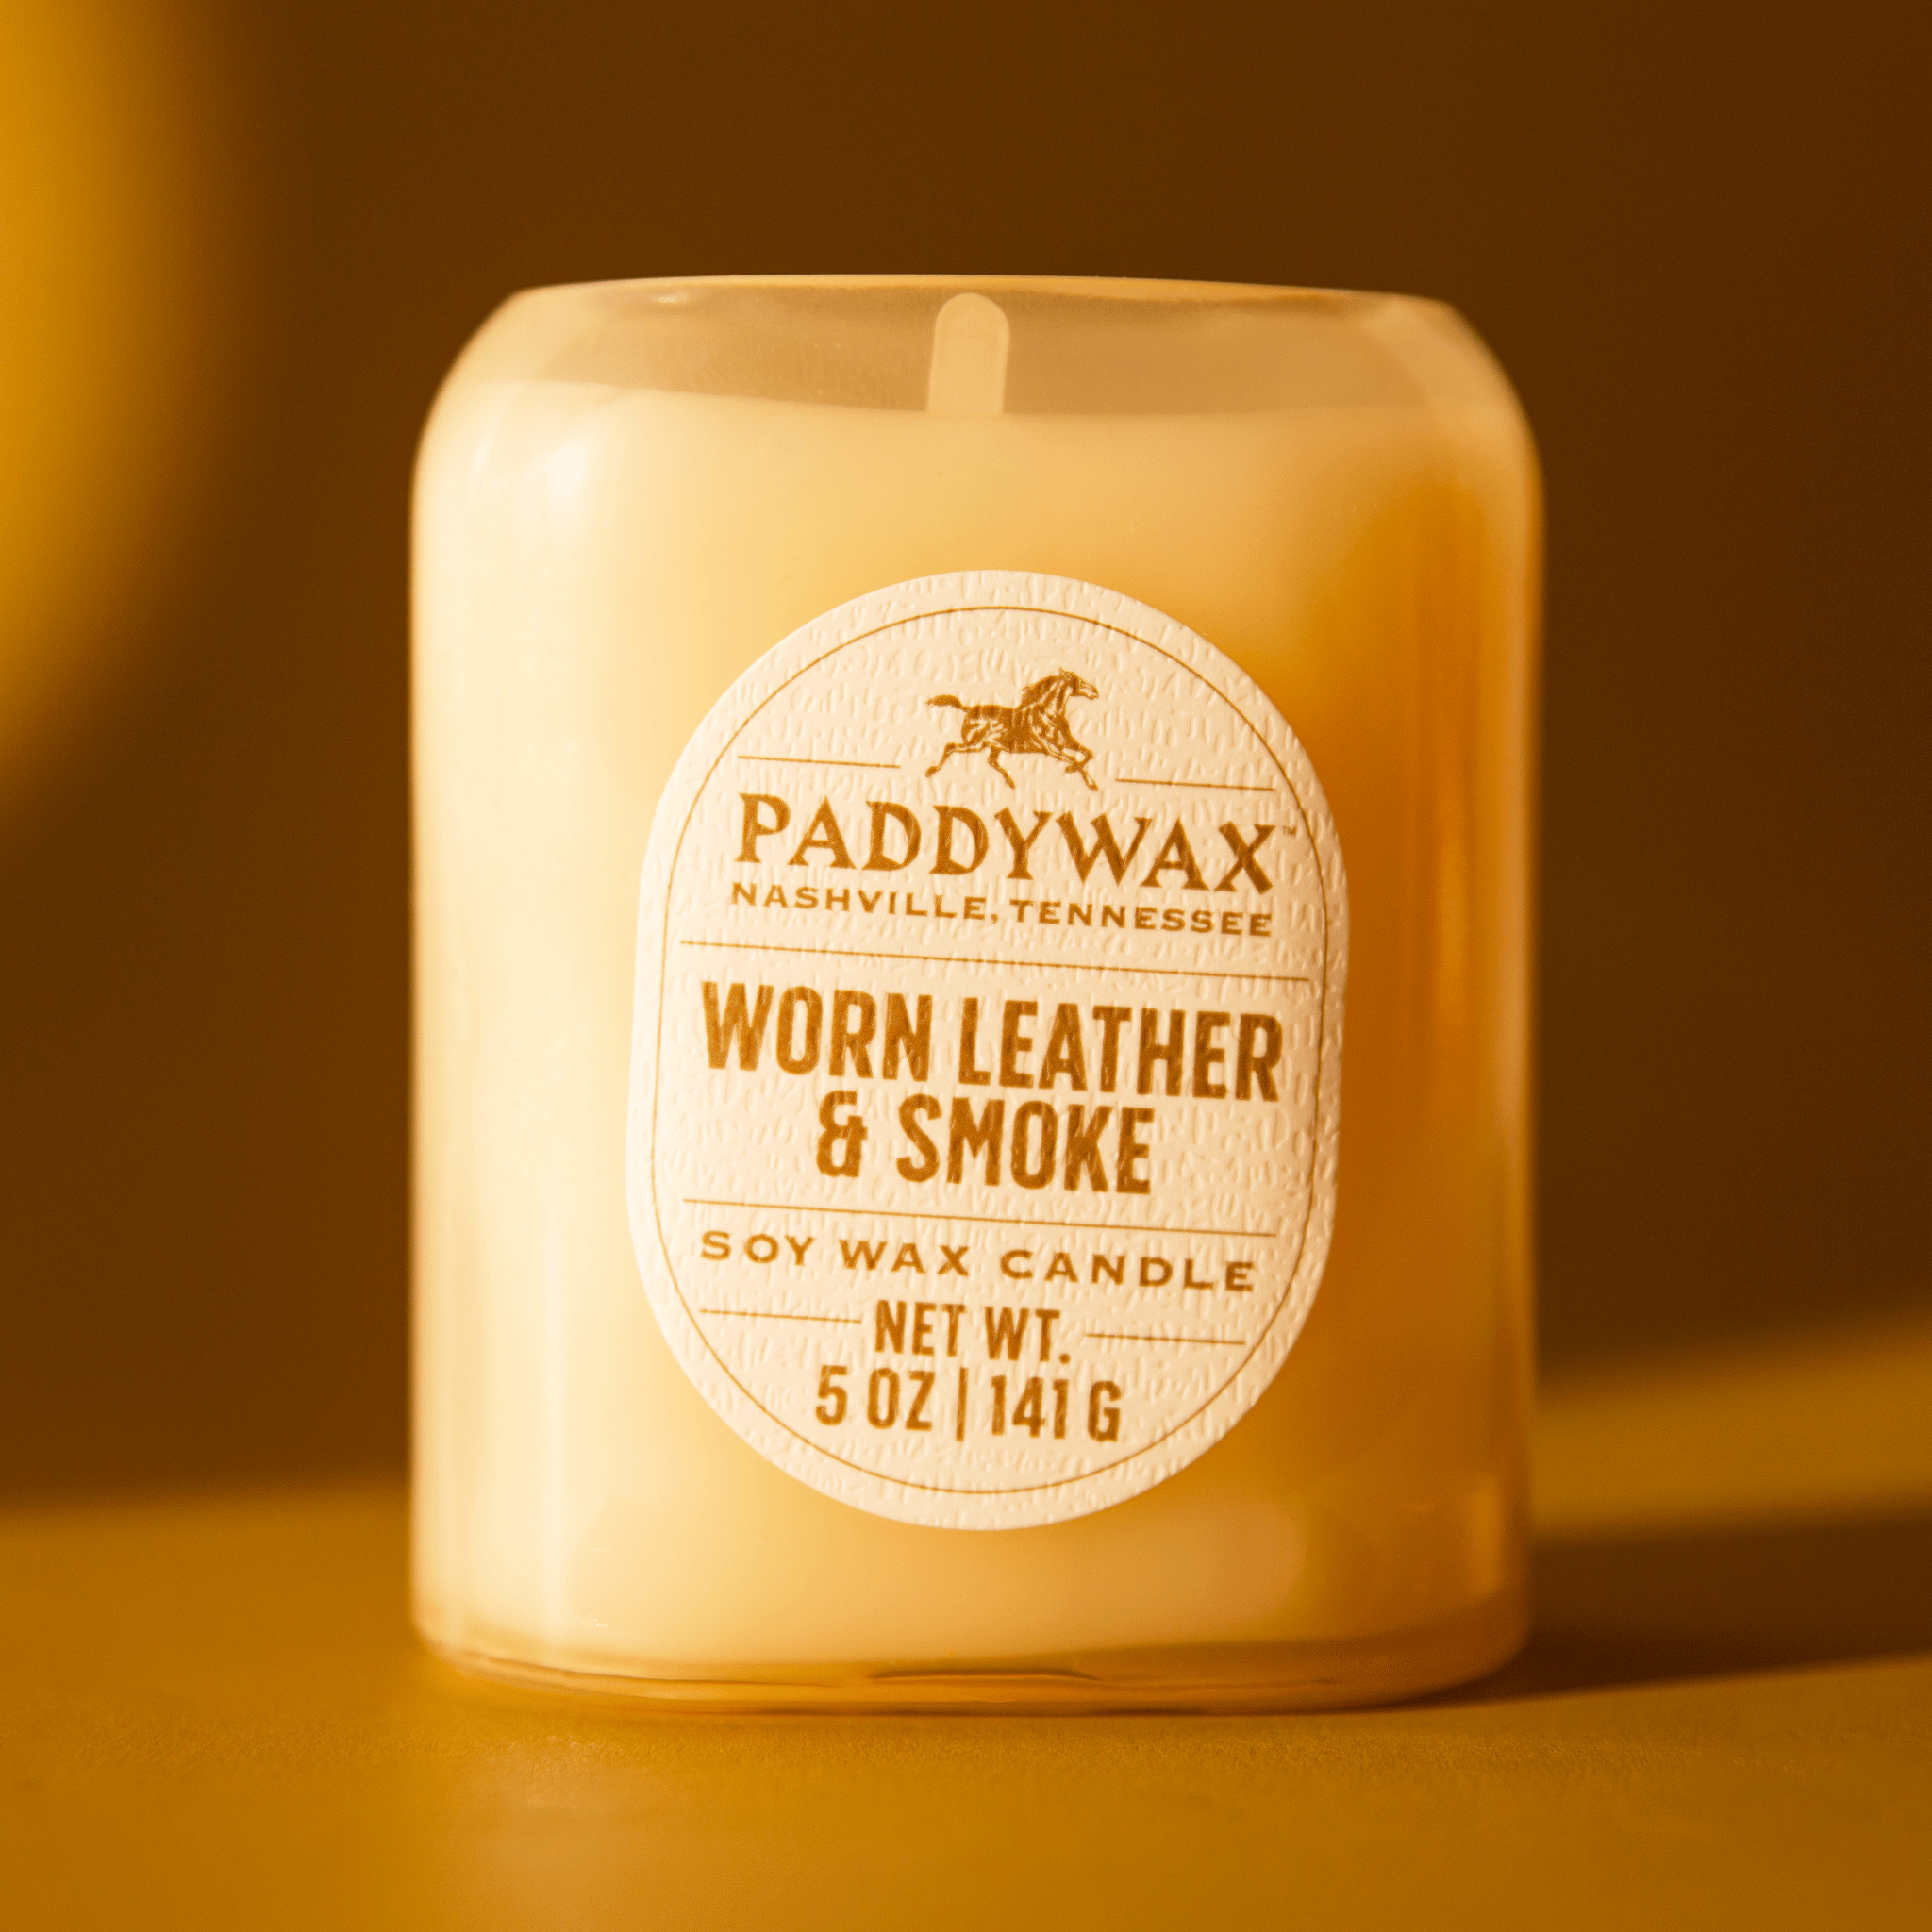 On an orange background is a neutral glass jar candle with an oval label that reads, "Paddywax Worn Leather & Smoke". 